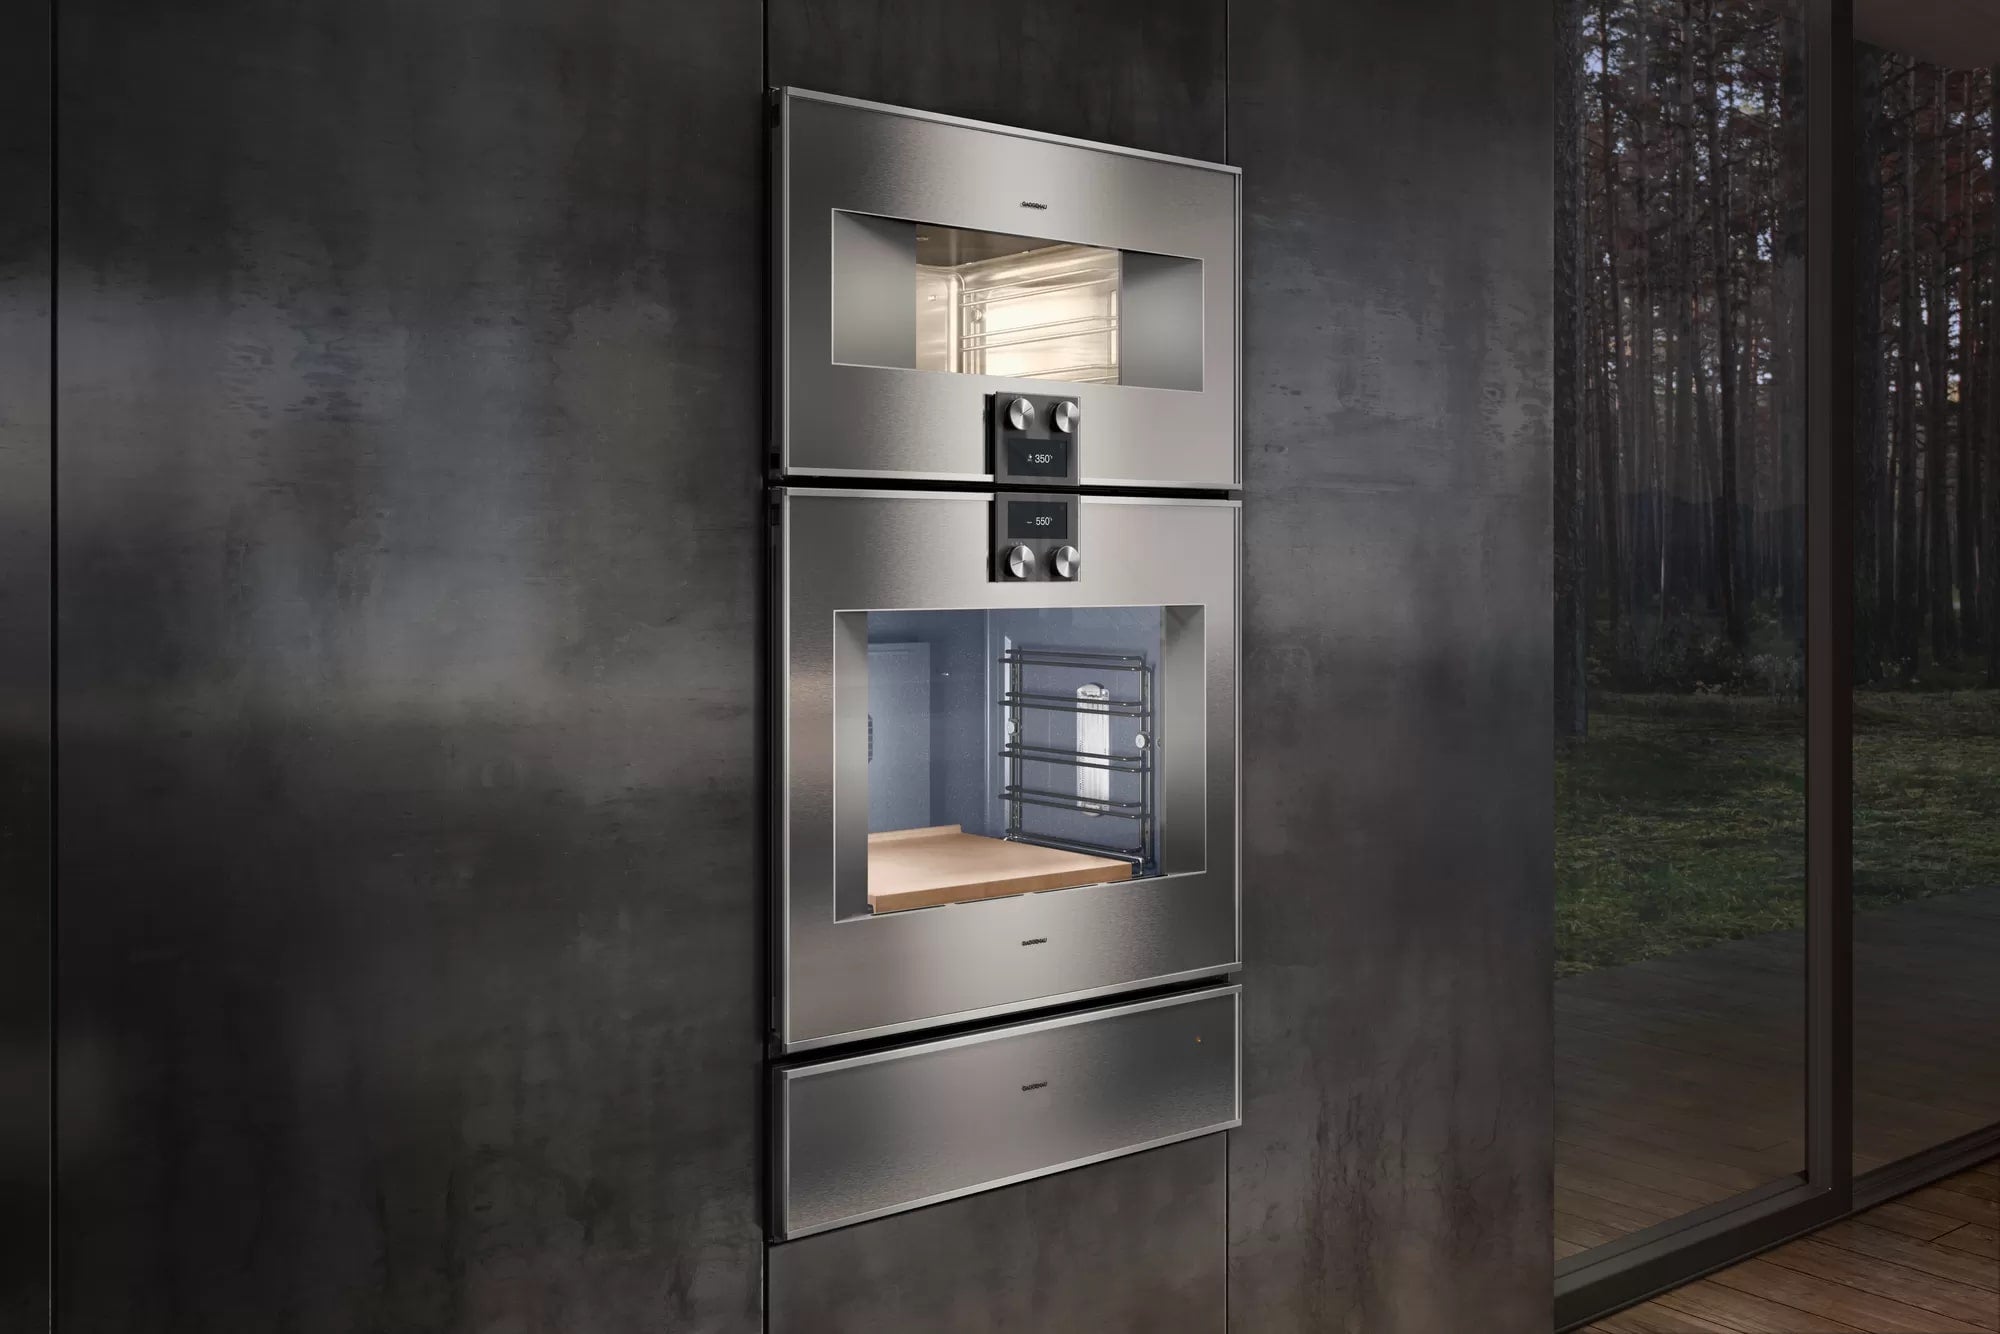 Gaggenau - 2.1 cu. ft Steam Wall Oven in Stainless - BS485612